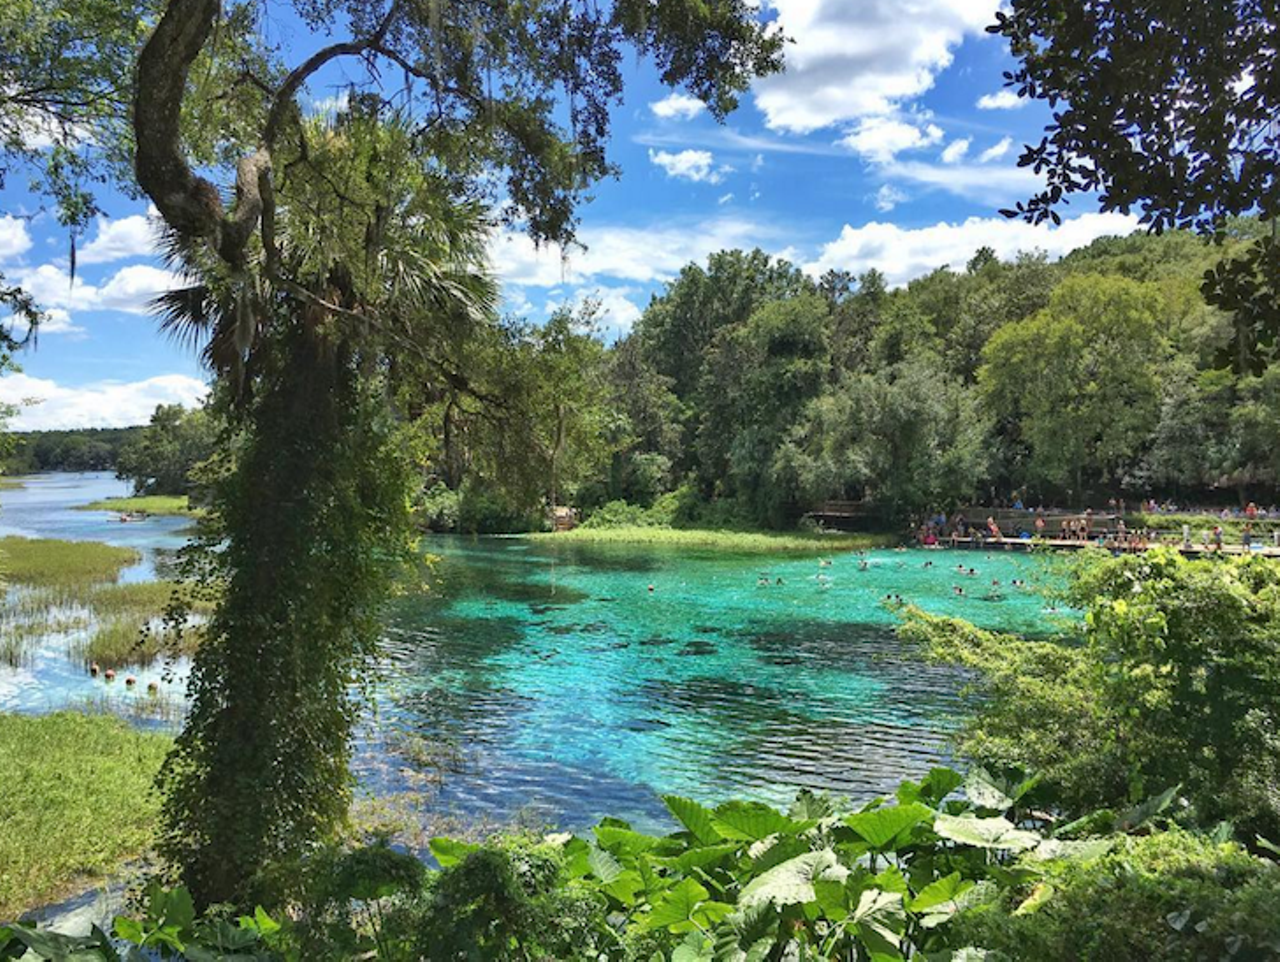 Rainbow Springs
Estimated driving distance from Orlando: 1 hour 34 min
Being Florida&#146;s fourth largest spring, this spot is famous for canoeing, tubing and more&#133;.within the designated areas. The available campground is 9 miles from the day use area with water and electricity and fishing available nearby. 
Photo via unashamed15/Instagram